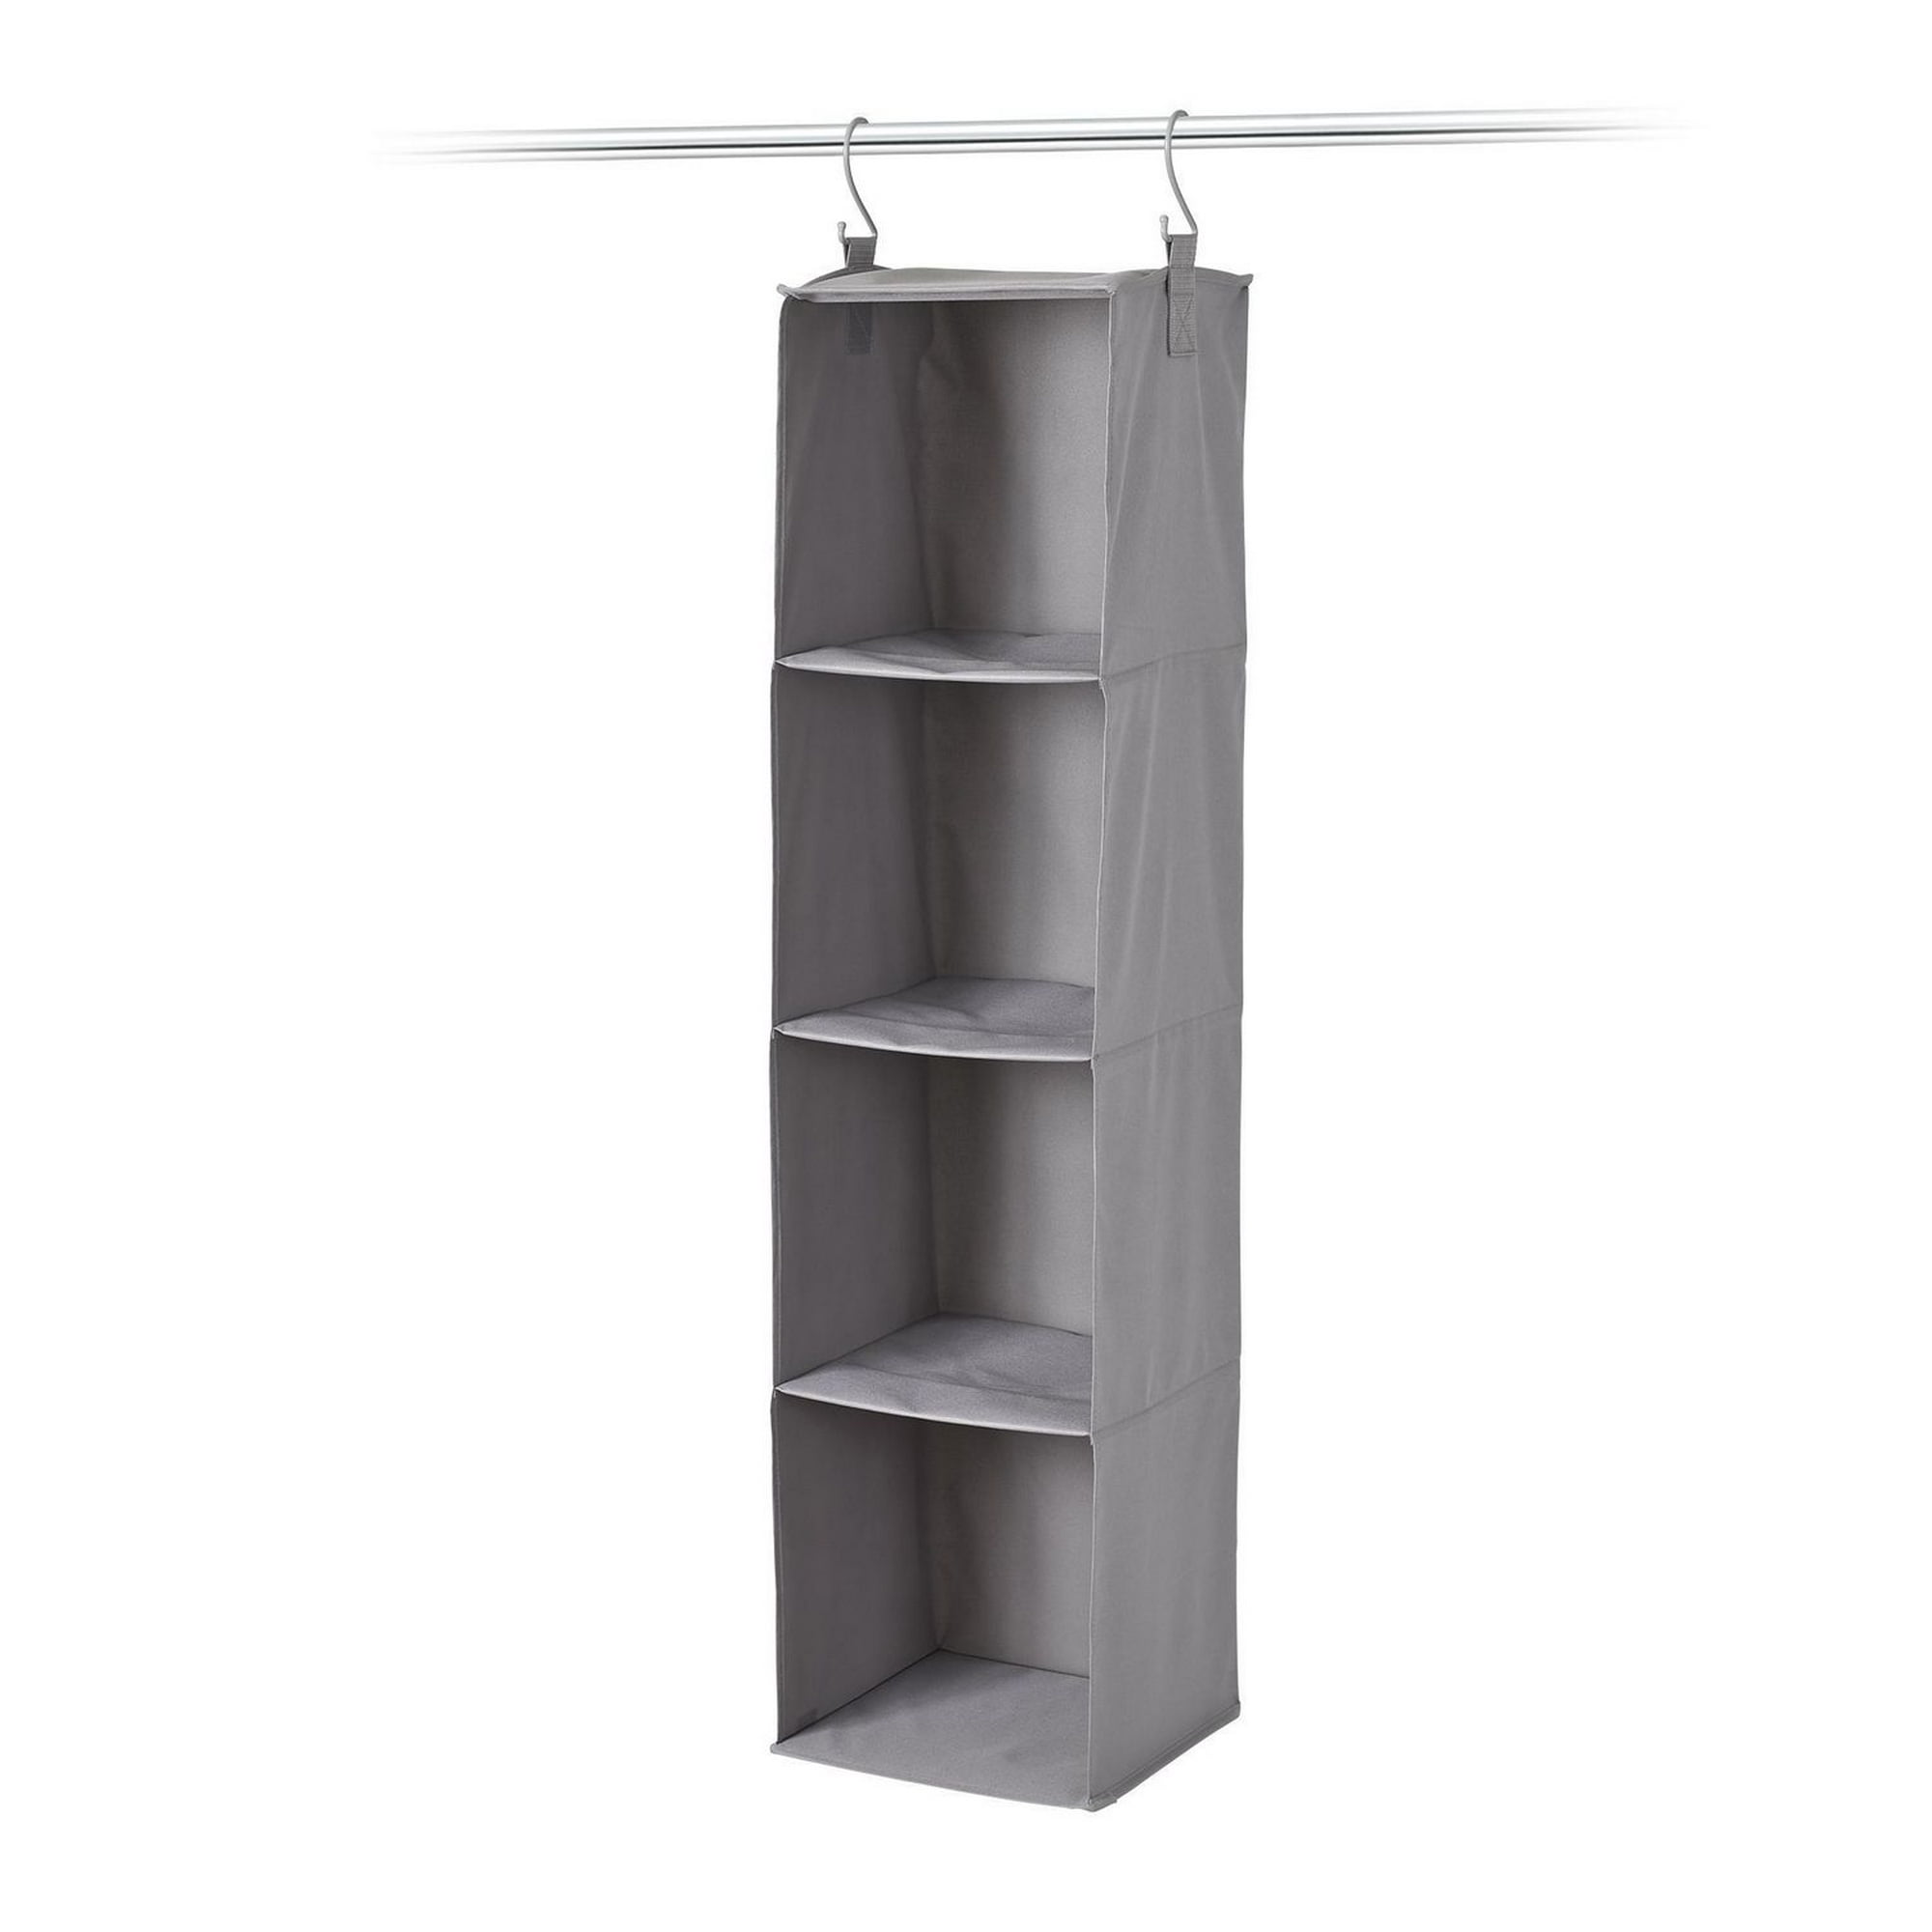 Buy House of Quirk Closet Hanging Organizer with Mesh 30 Pockets